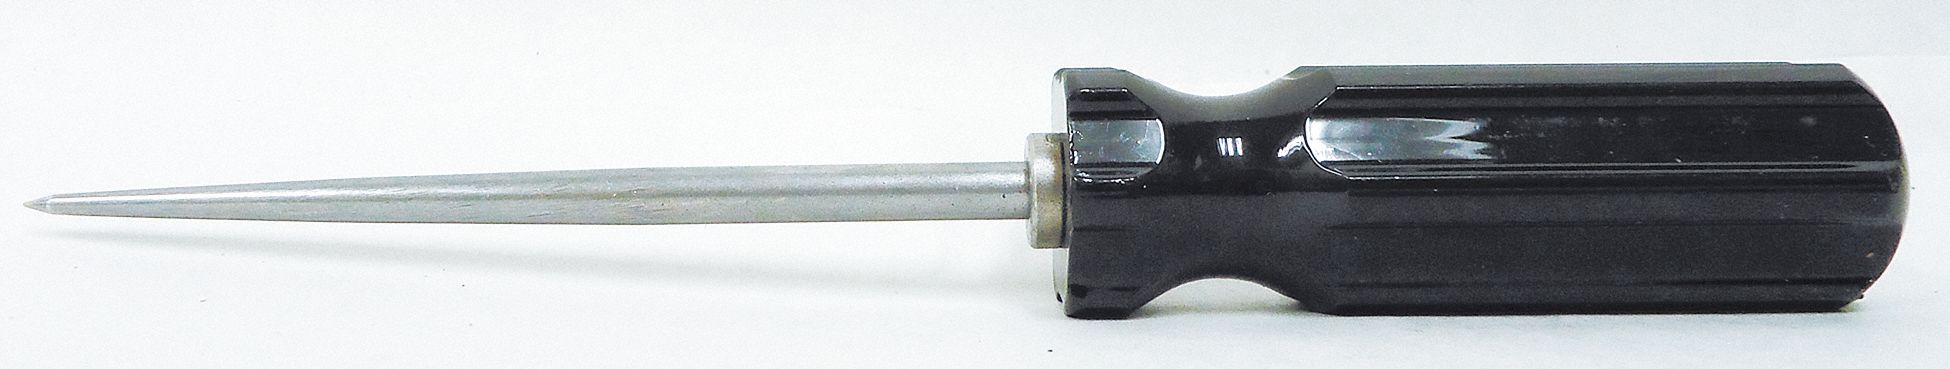 Tire Awl: 3 3/4 in Lg, Steel with Plastic Handle